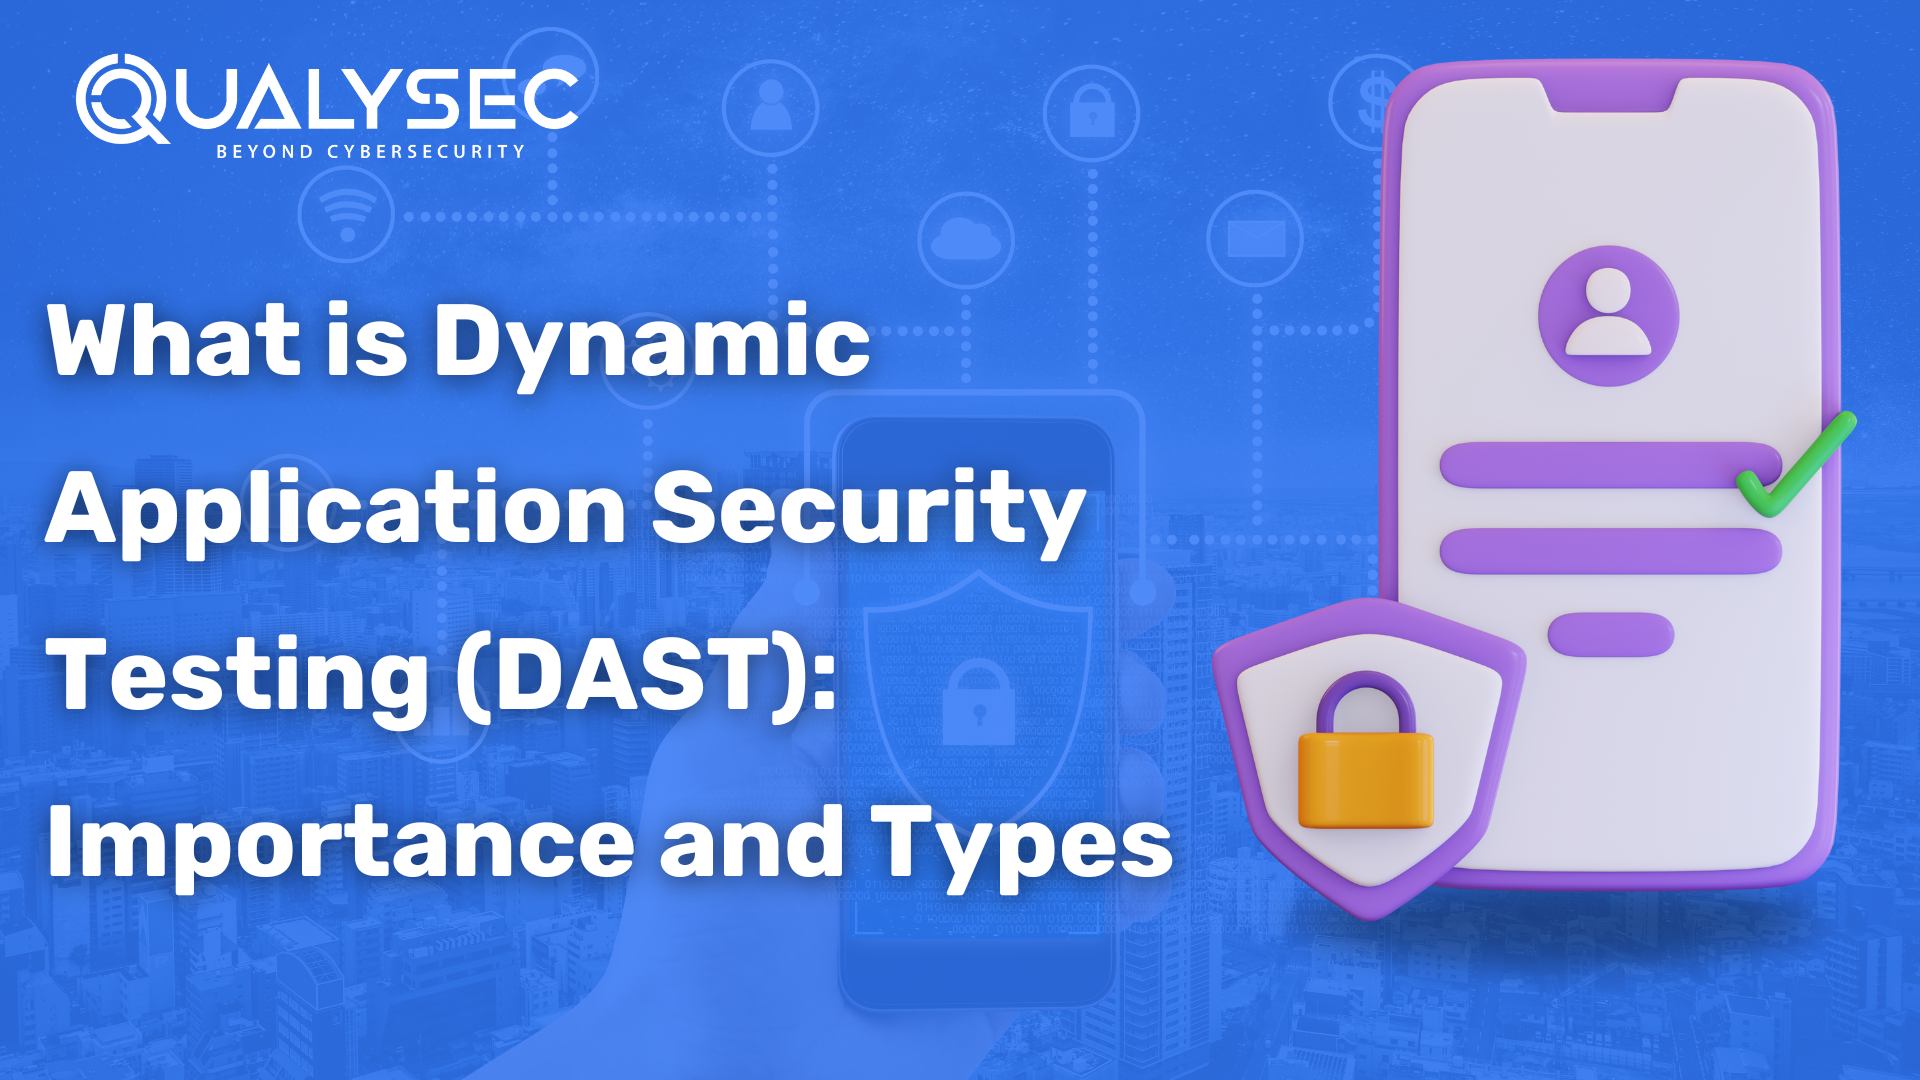 Dynamic Application Security Testing